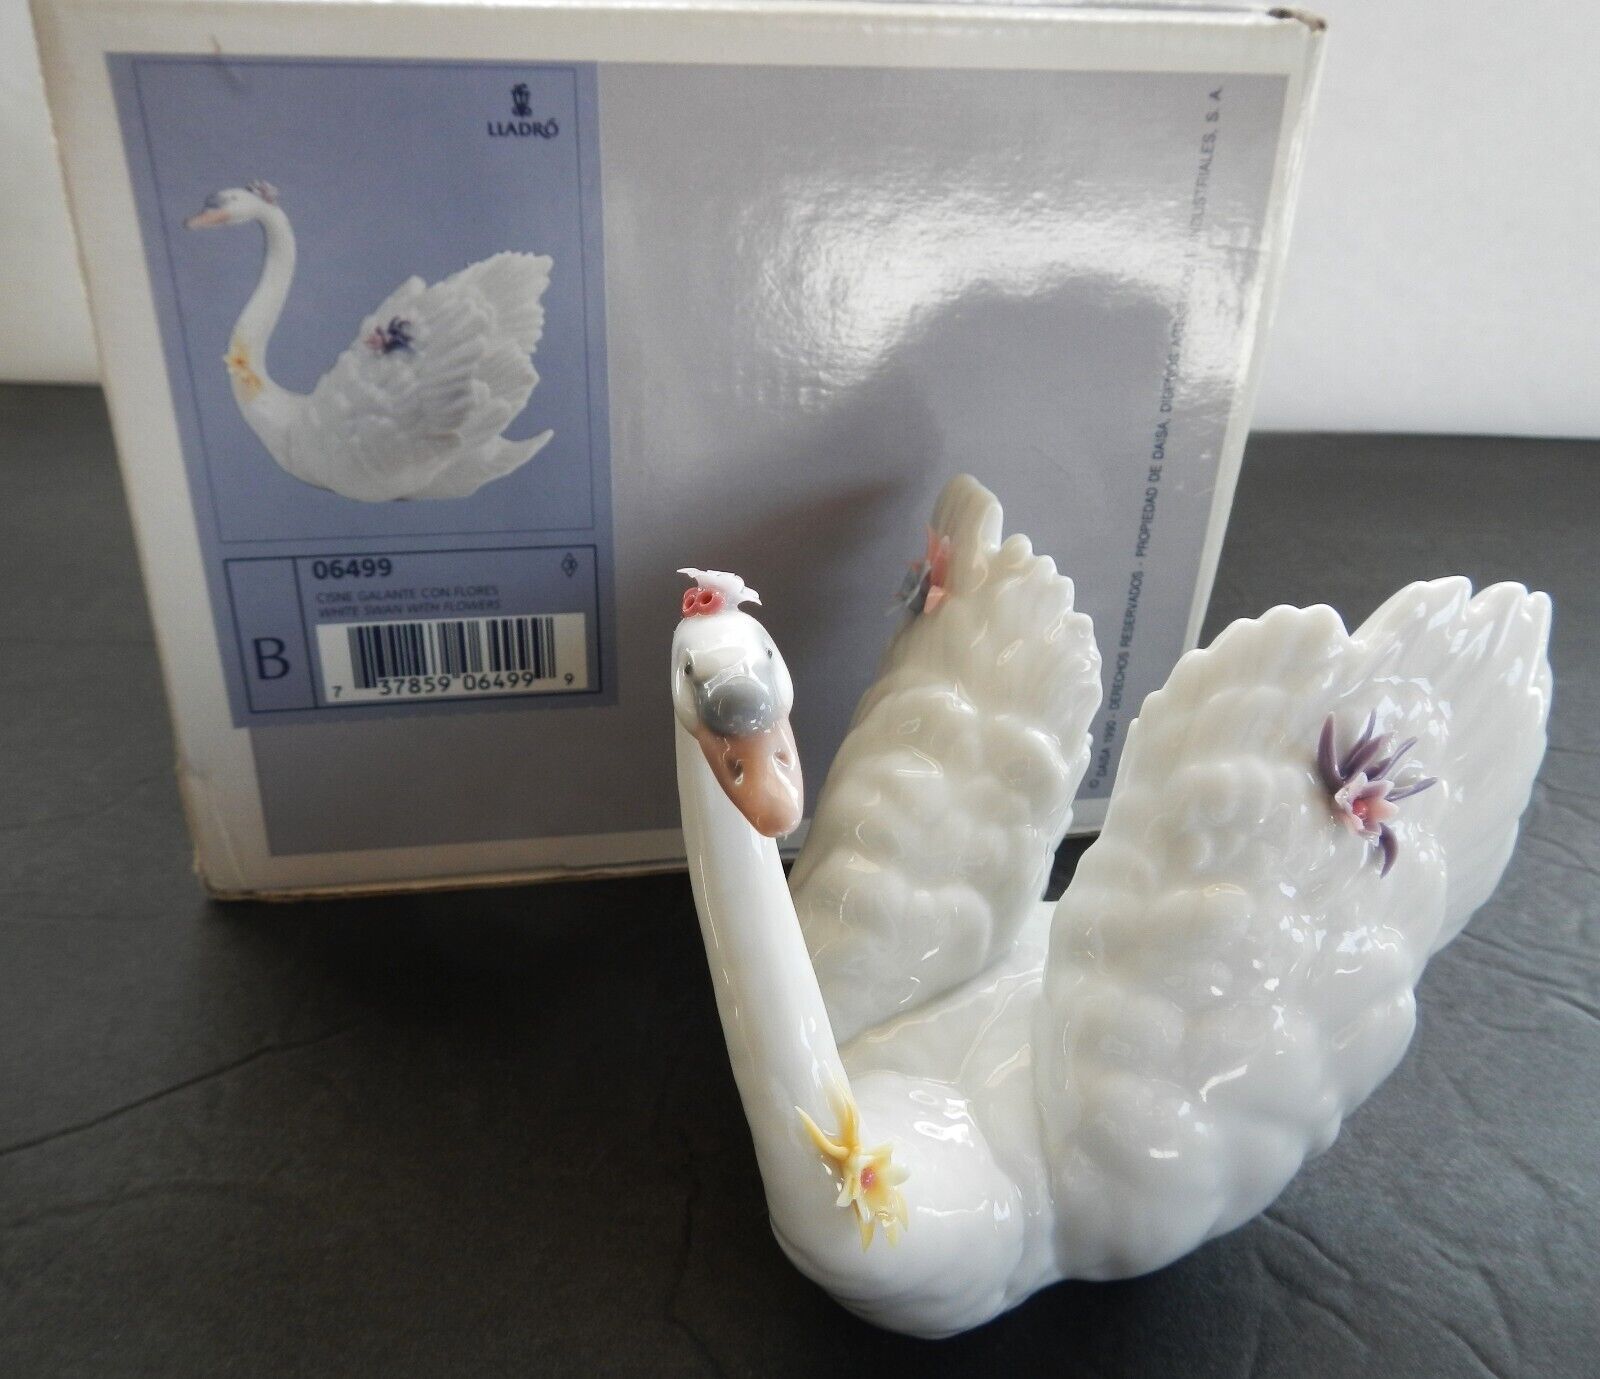 Beautiful Retired Lladro Figurine Titled White Swan With Flowers, No. 6499, MINT